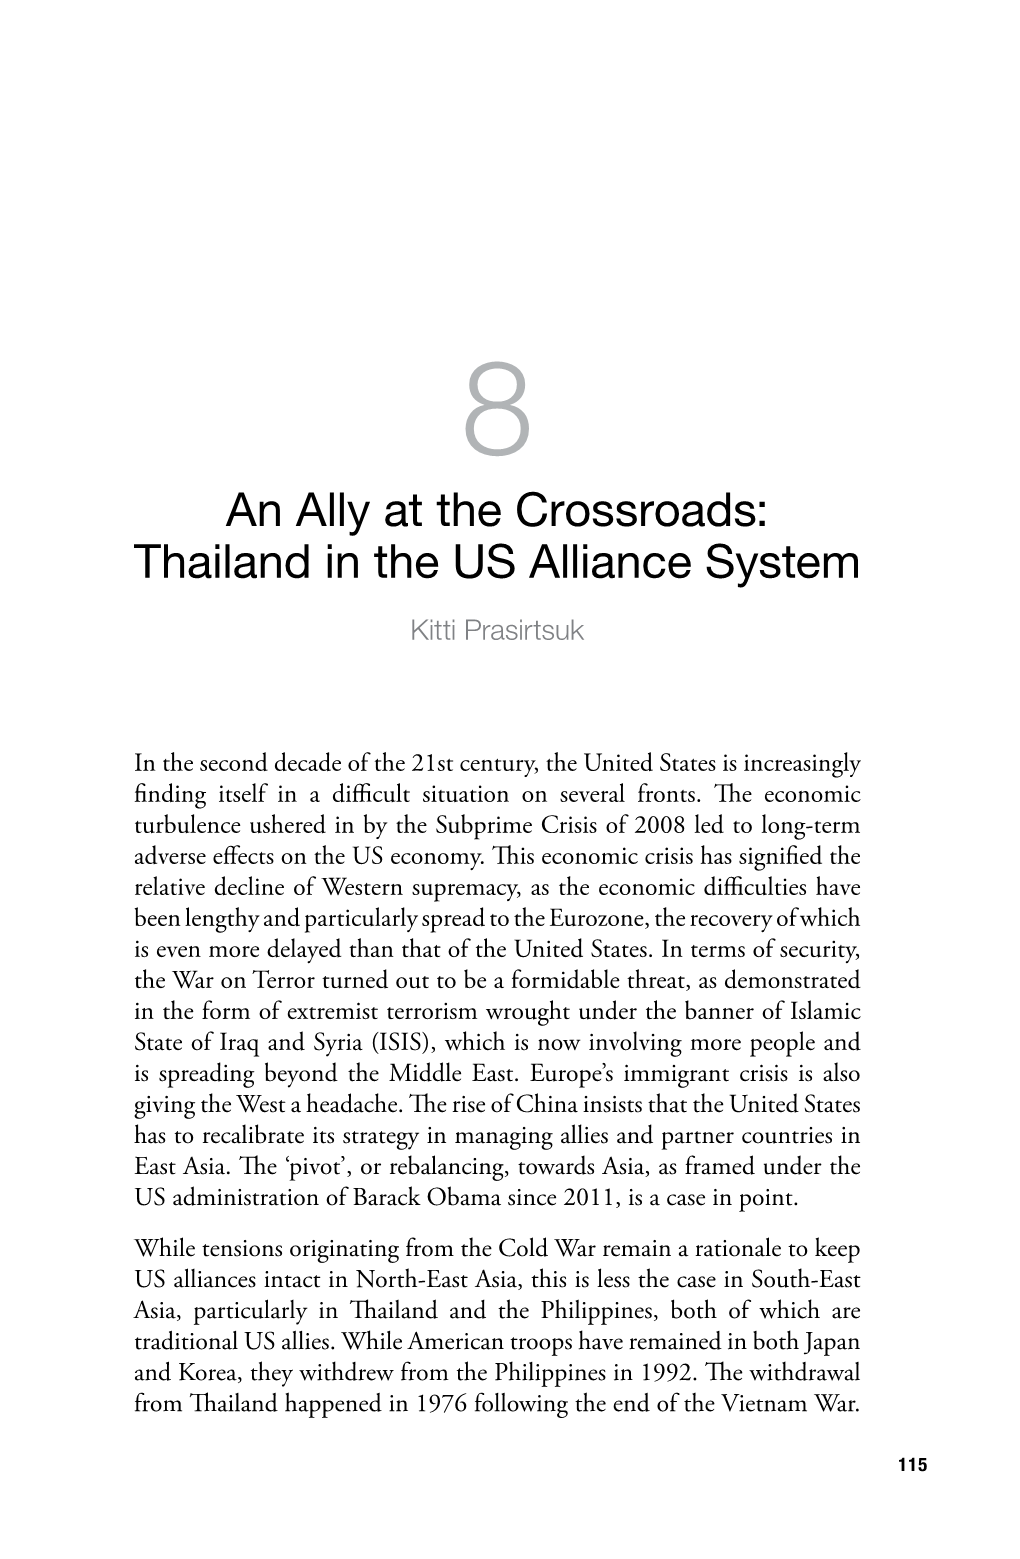 An Ally at the Crossroads: Thailand in the US Alliance System Kitti Prasirtsuk